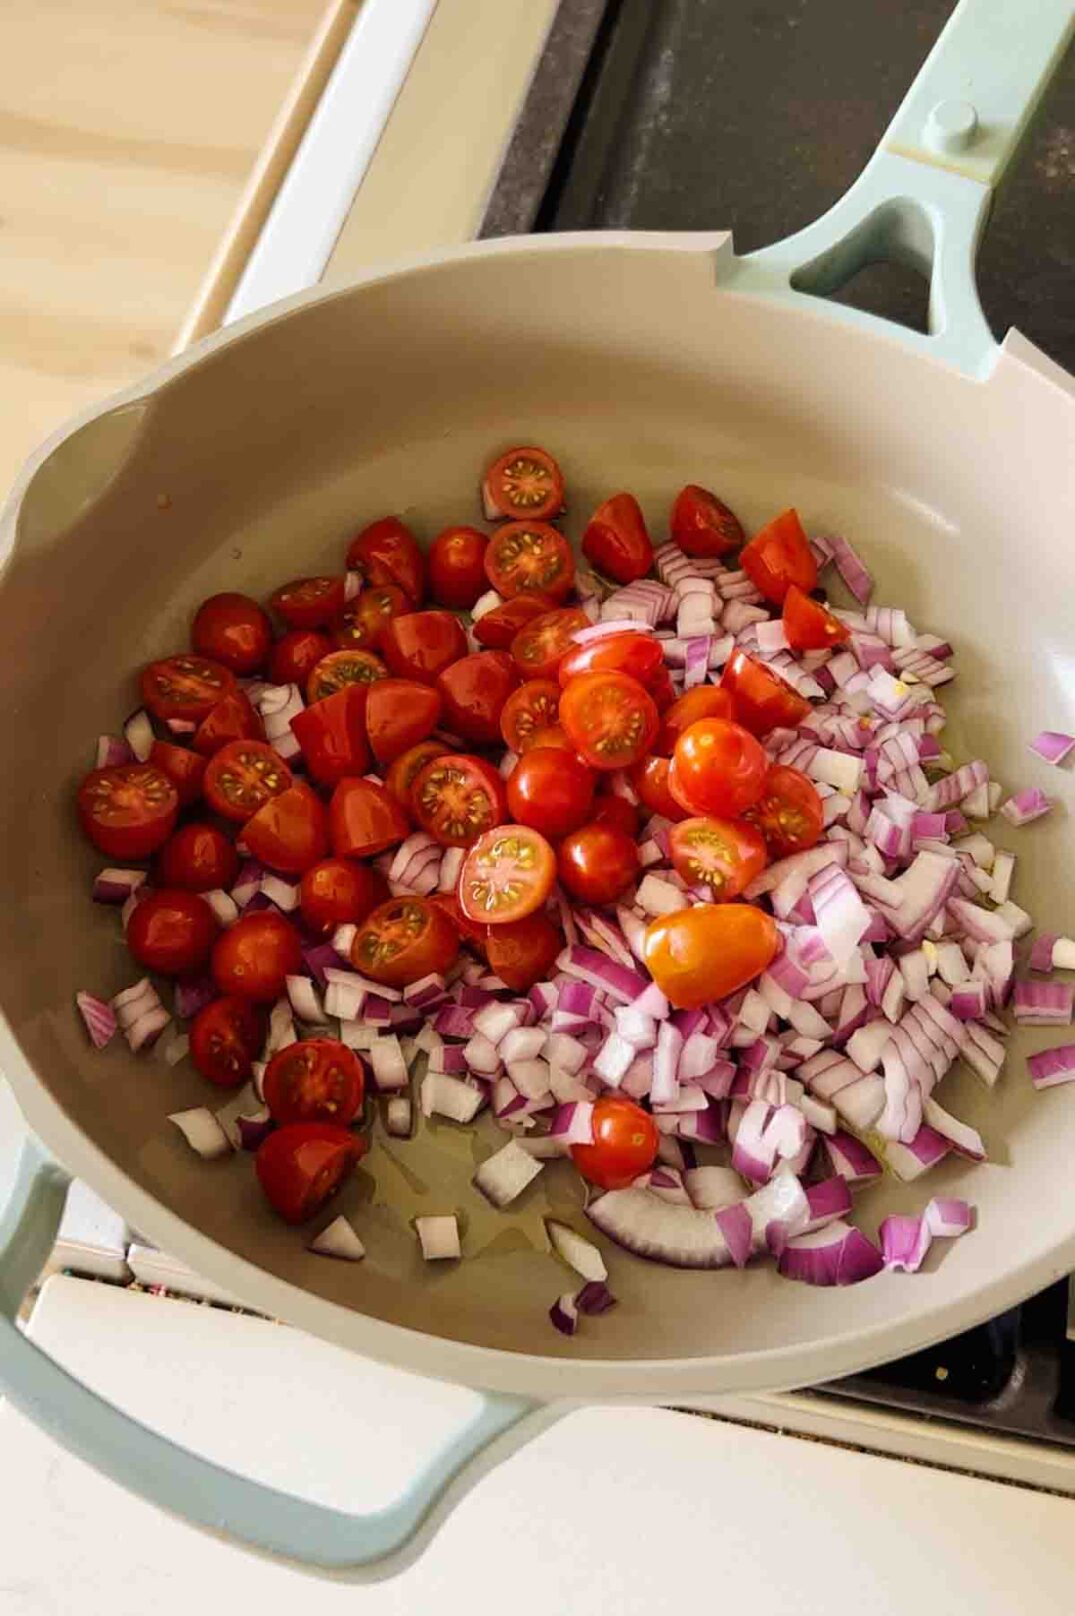 tomatoes and onions cooking in a blue pan.